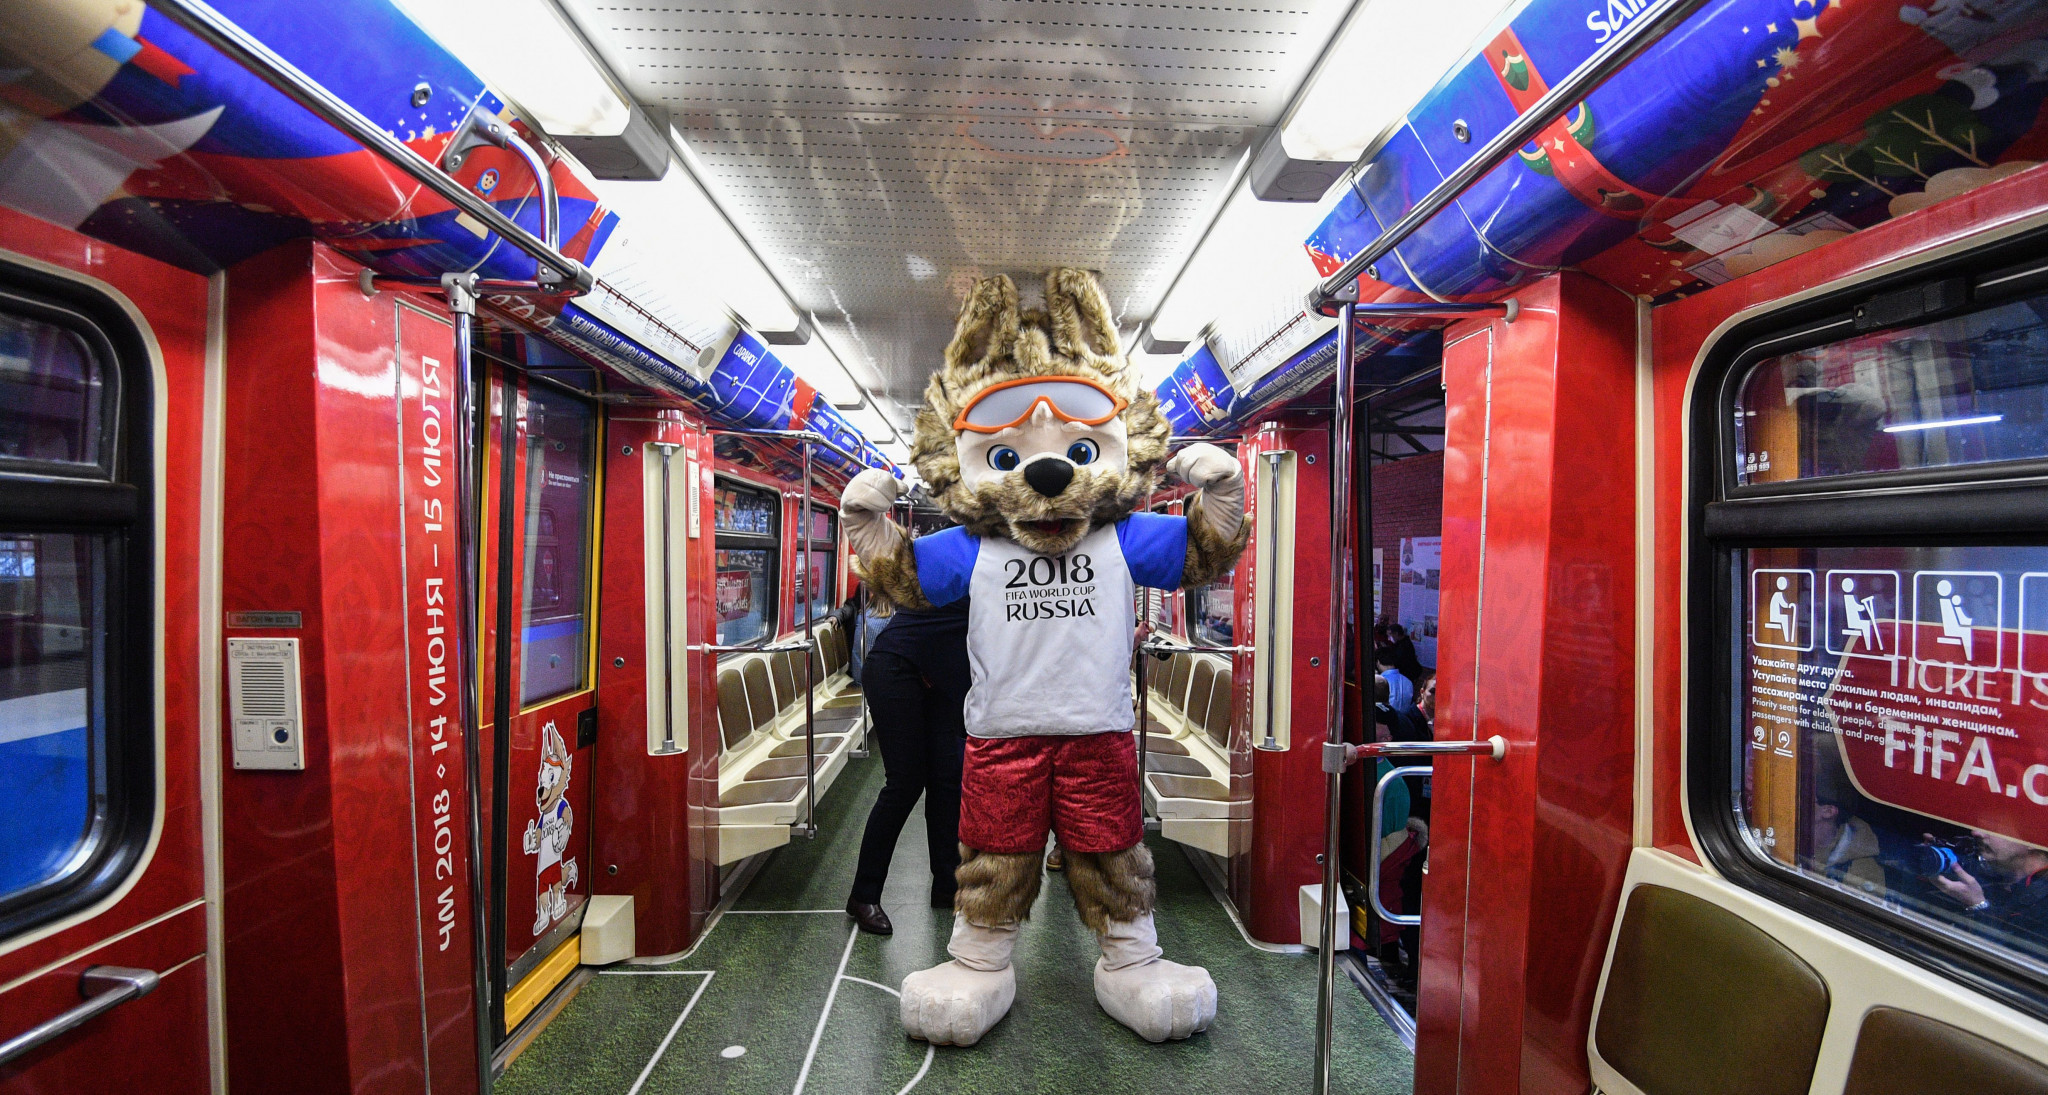 Carriages on the Moscow Metro have recently been decorated to celebrate the upcoming World Cup ©Getty Images